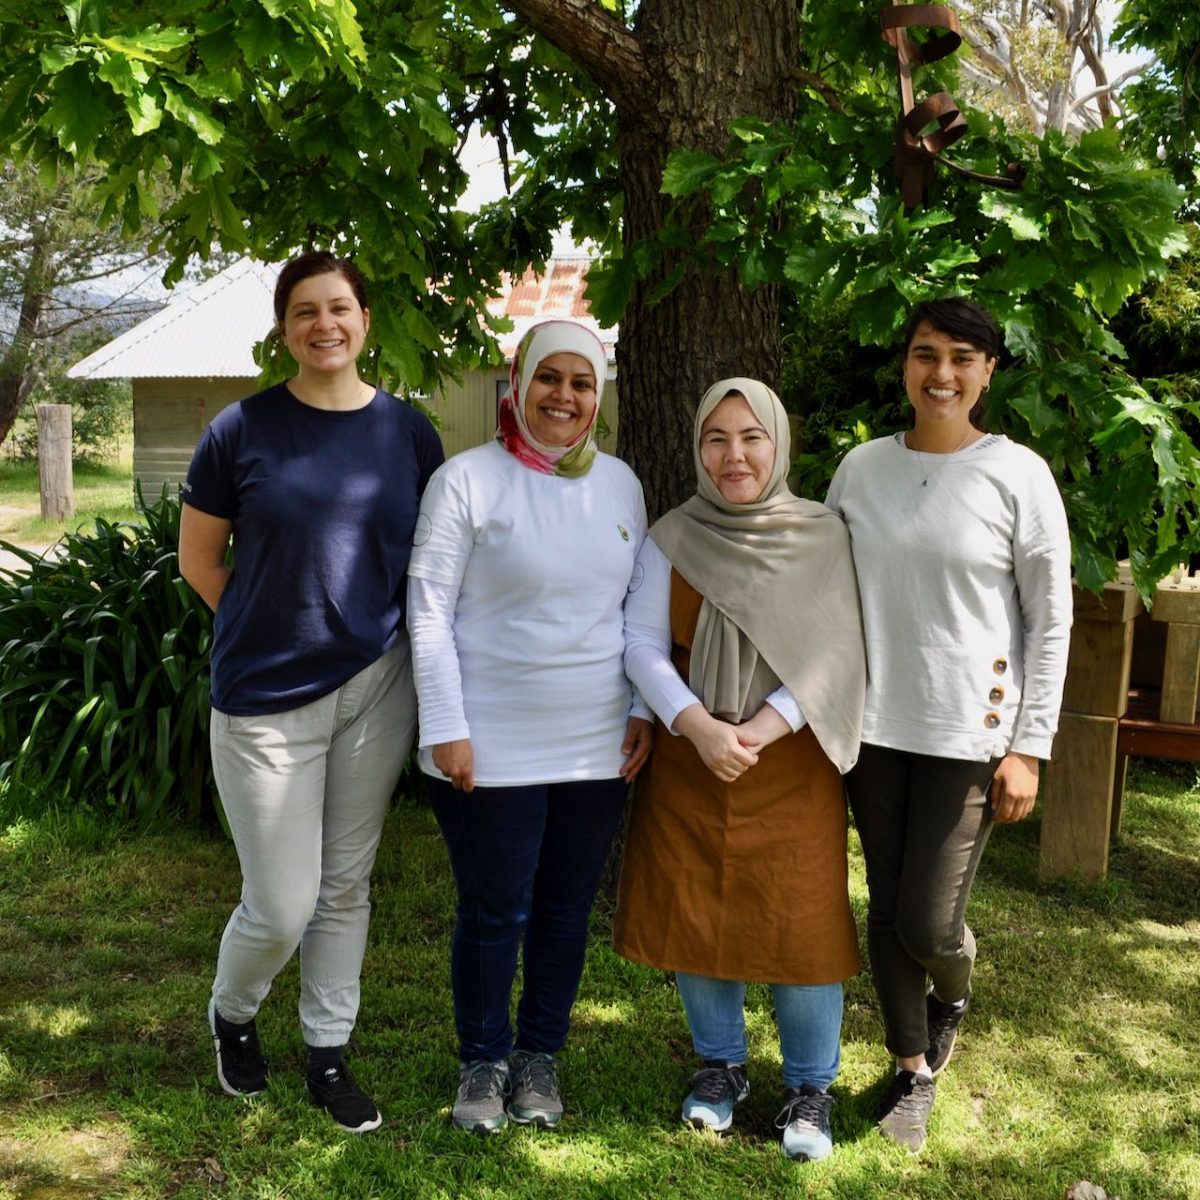 Four smiling women, two wearing headscarves, stand under a tree